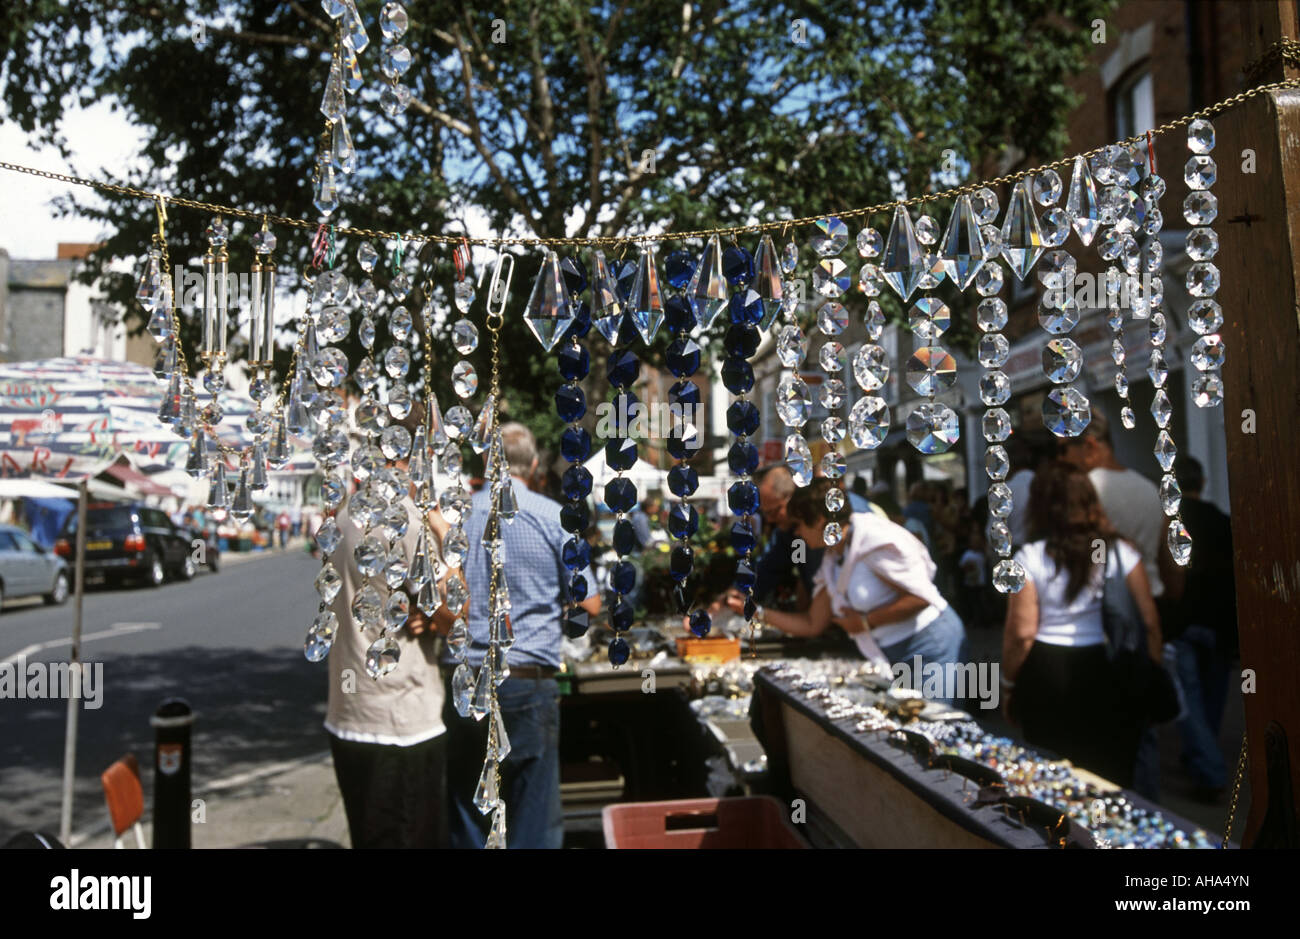 Bridport Saturday bric-a-brac market stall Dorset England UK showing crystals from old chandeliers Stock Photo